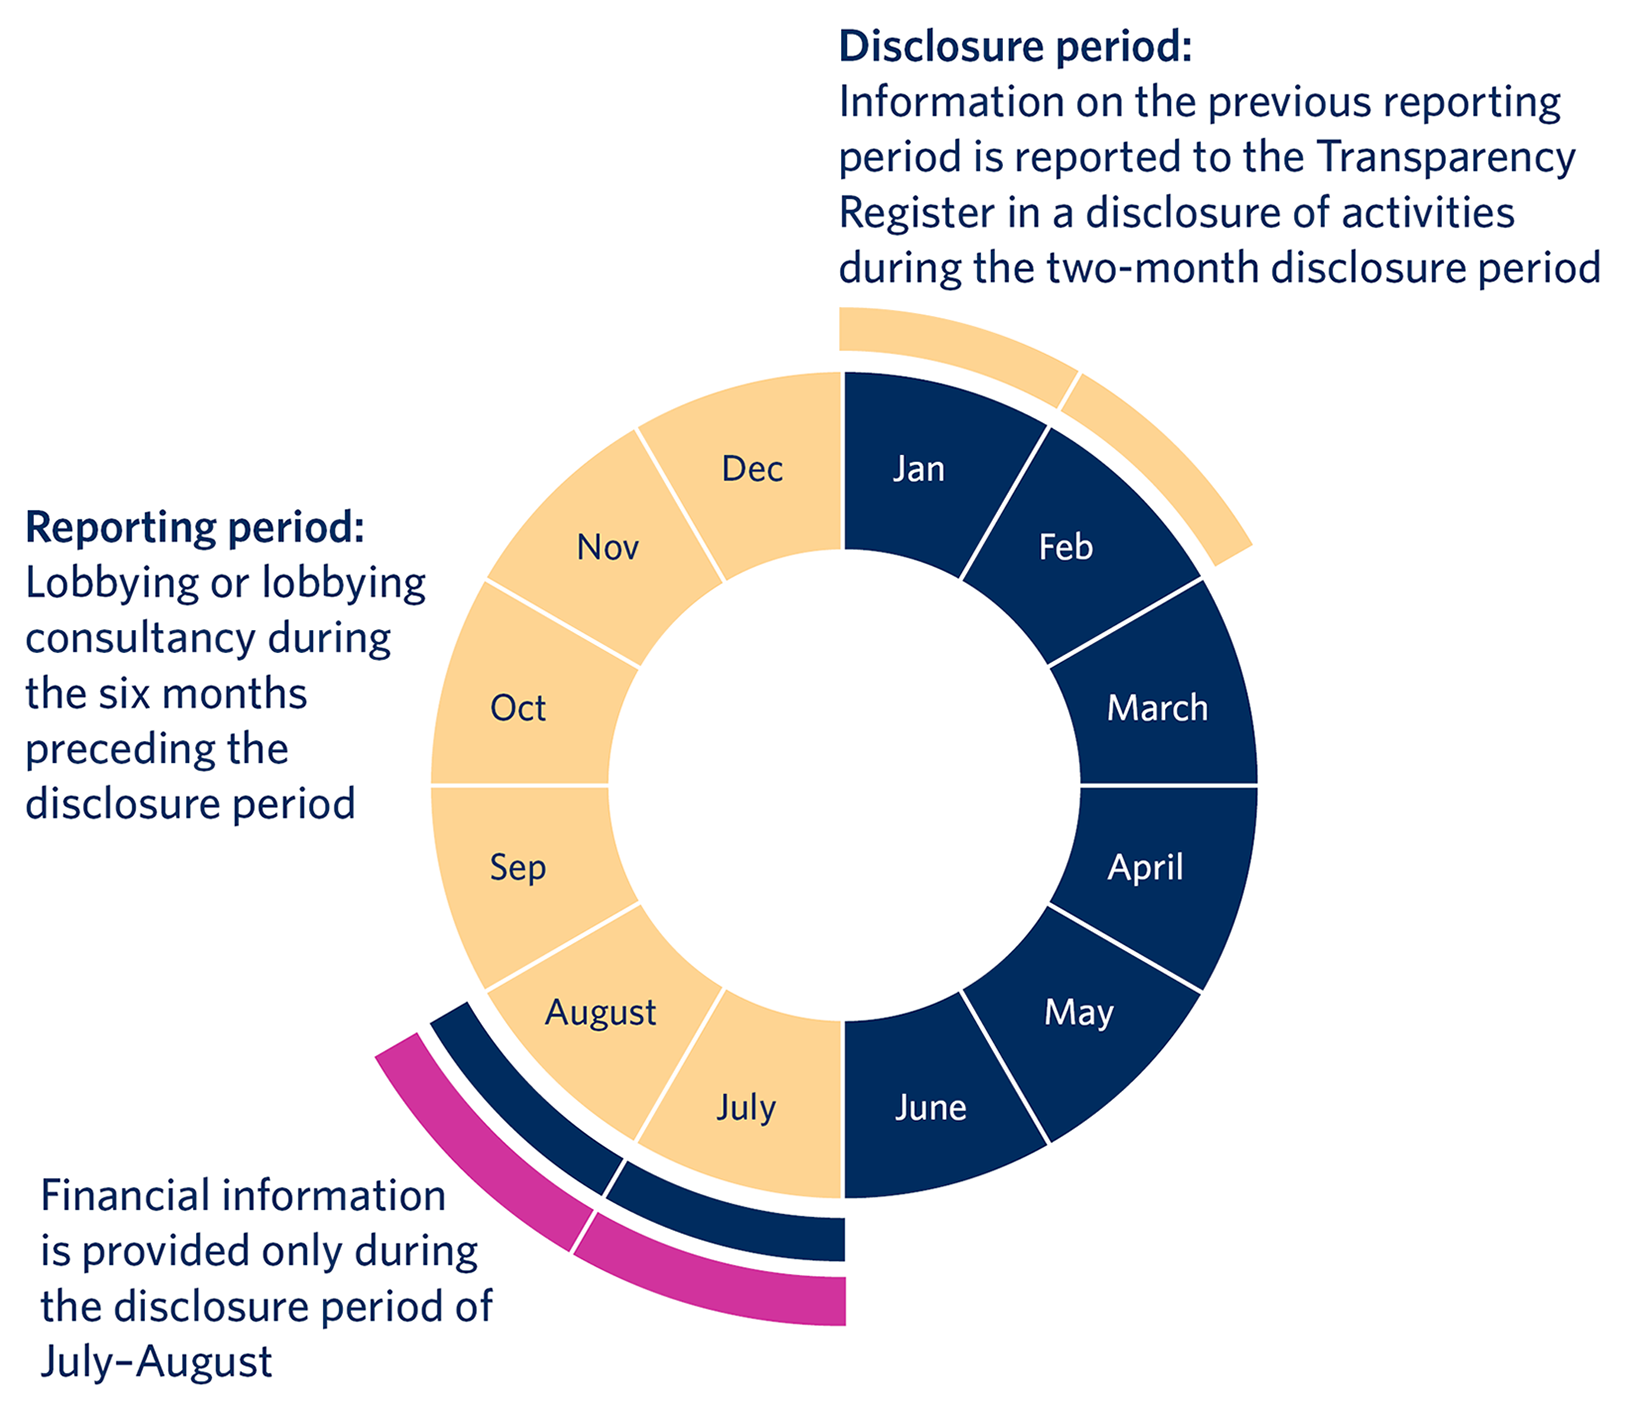 The periods for submitting disclosures on lobbying activities are January–February and July–August. In the disclosure period, a disclosure of activities is submitted for the preceding six months (January–June or July–December). Financial information is disclosed only once a year, during the disclosure period of July–August. 